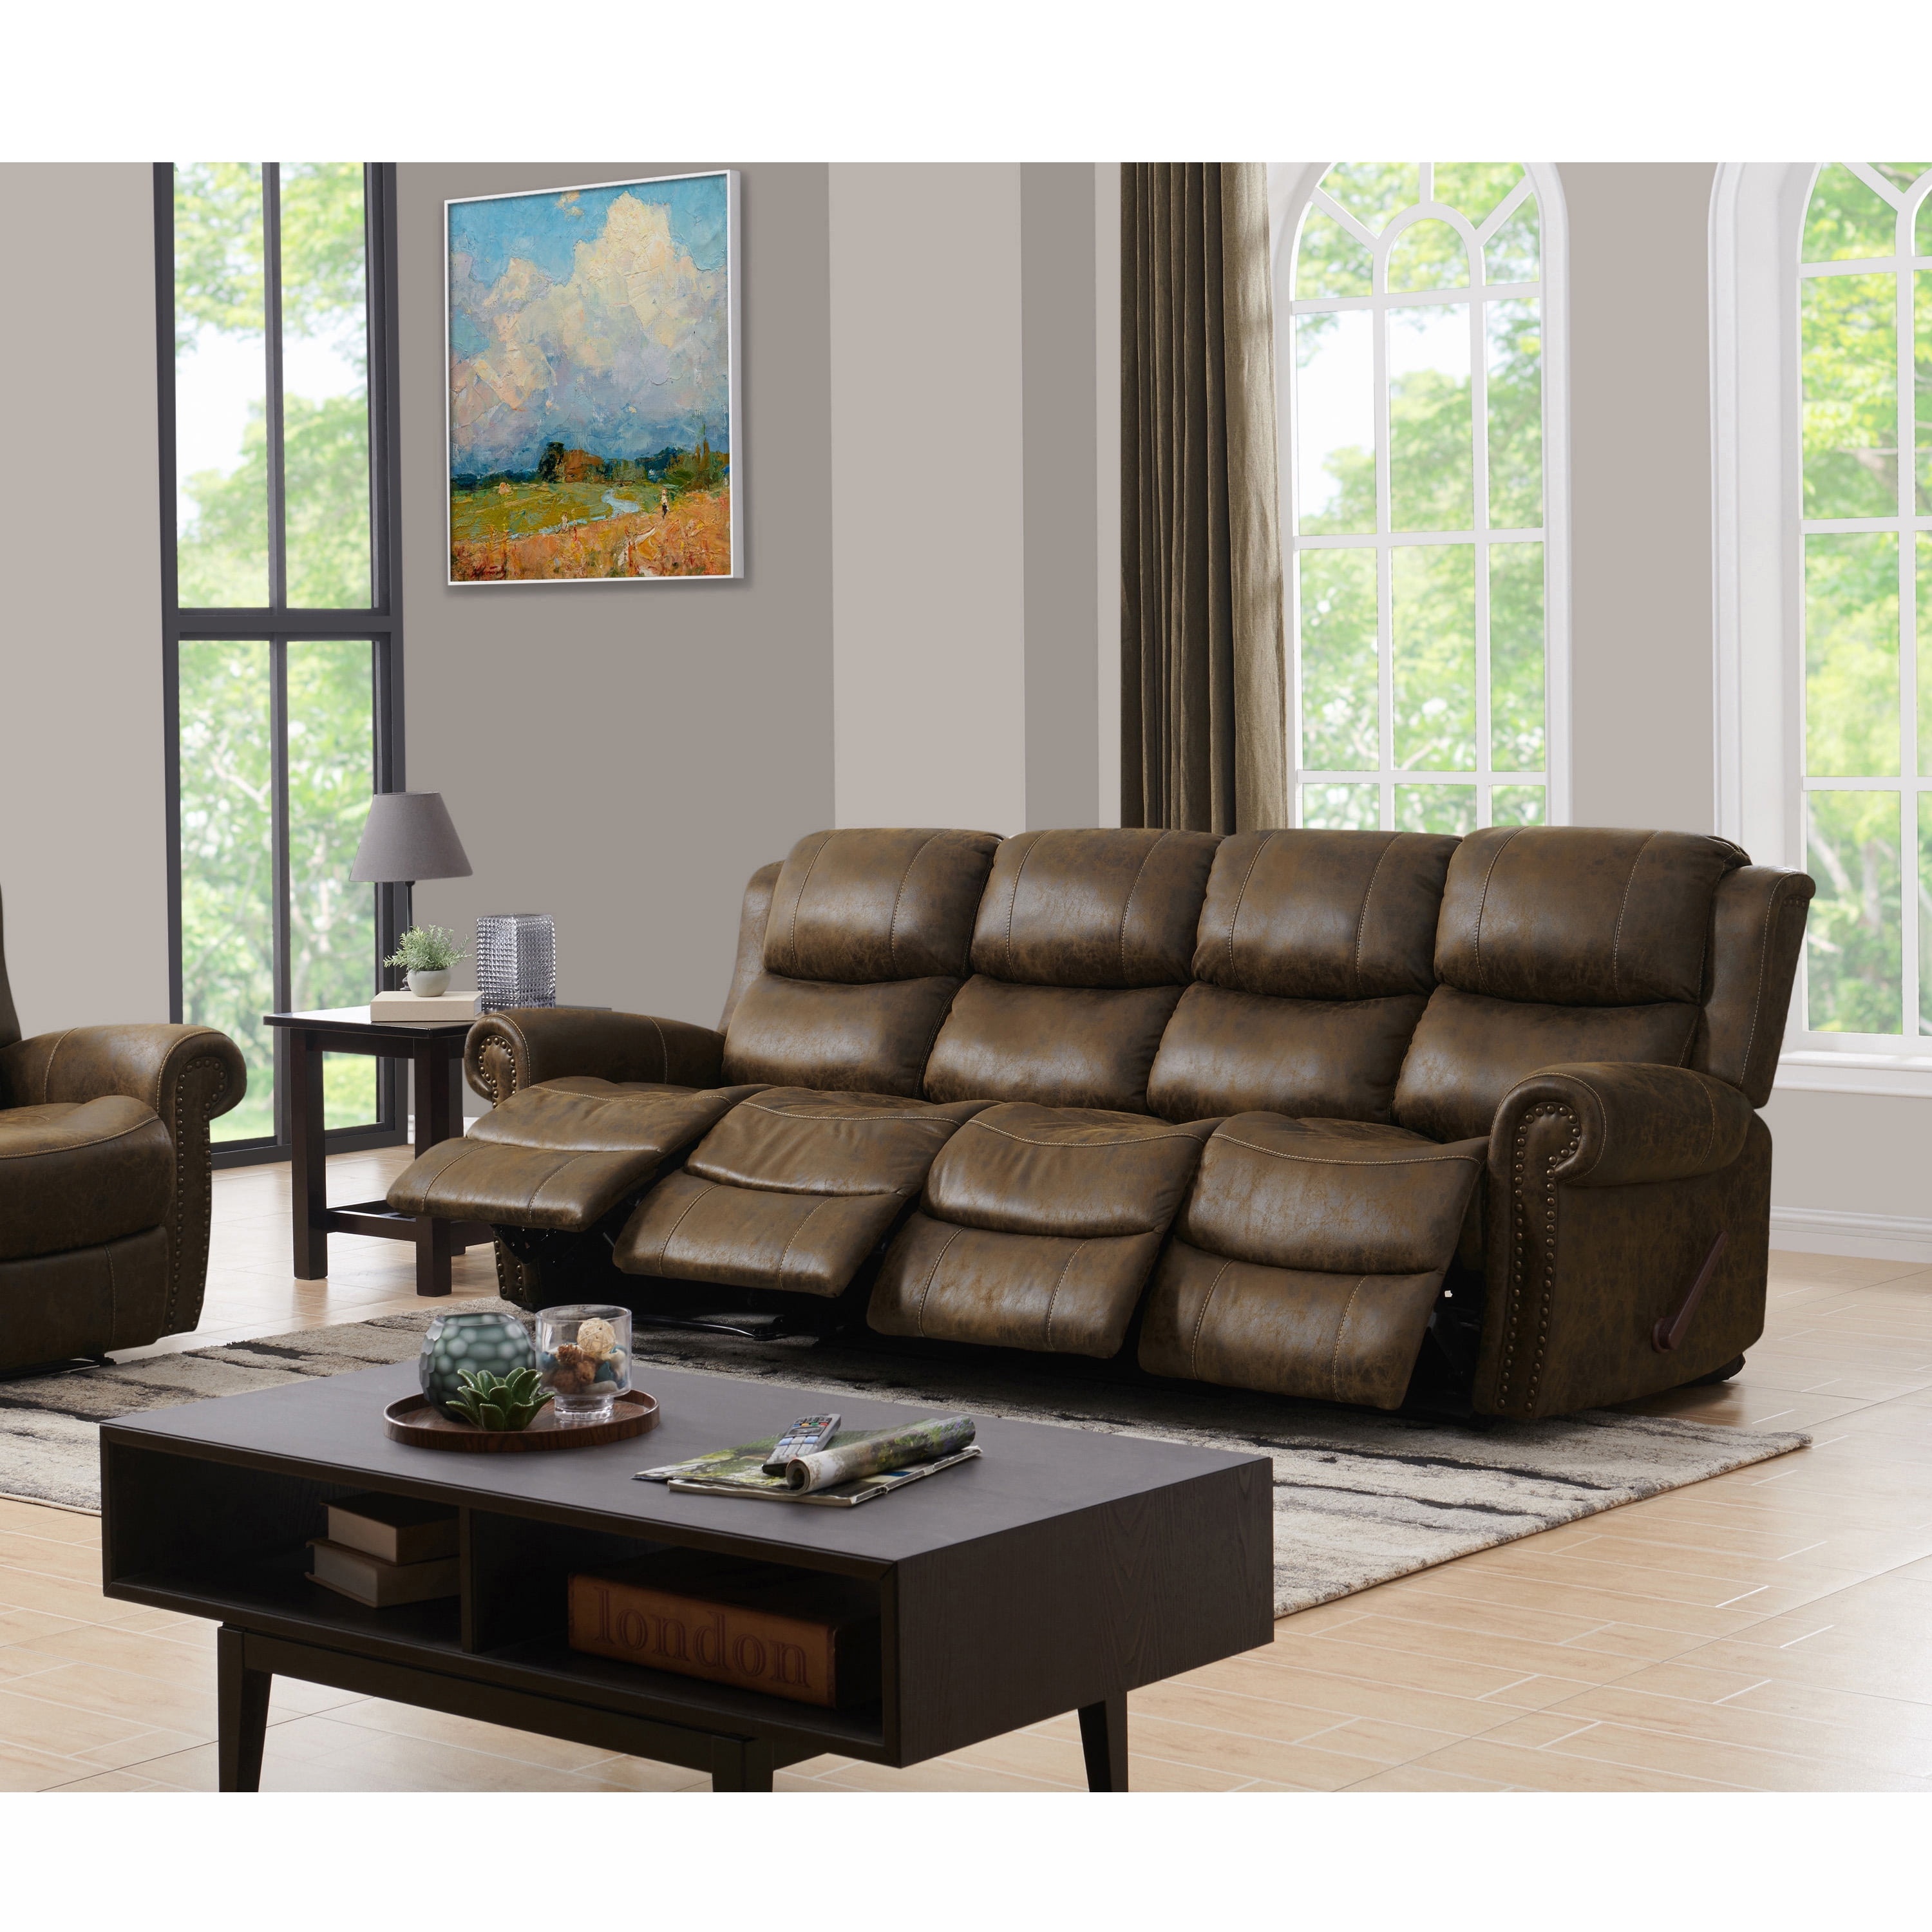 ProLounger Wall Hugger Rolled Arm Reclining Sofa in Distressed Saddle